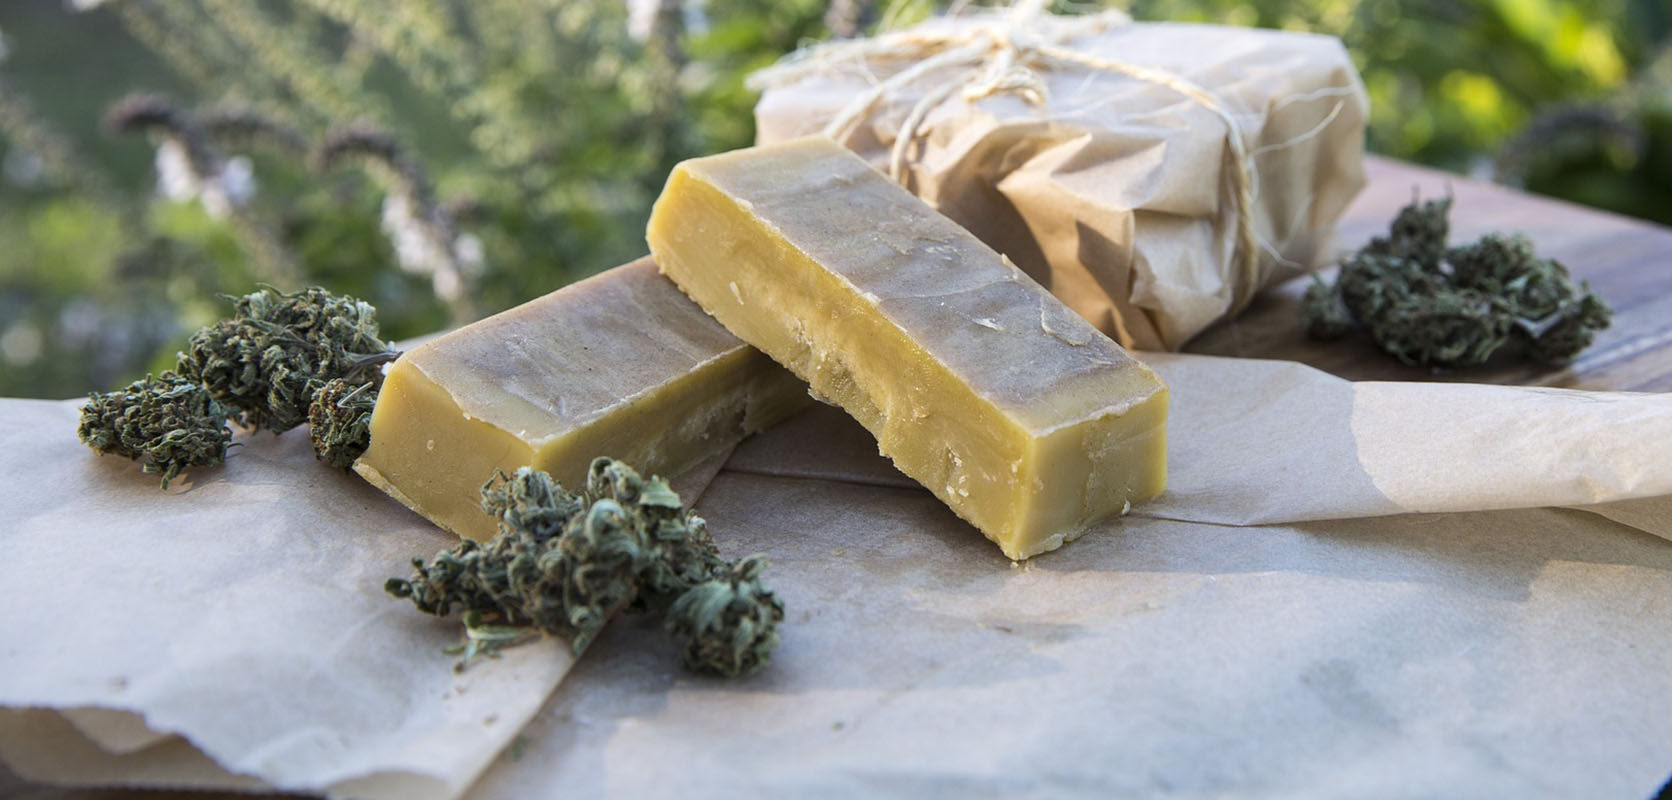 Sticks of canna butter to make weed brownies with BC bud from Low Price Bud online dispensary Canada for dispensary weed, edibles, and concentrates.